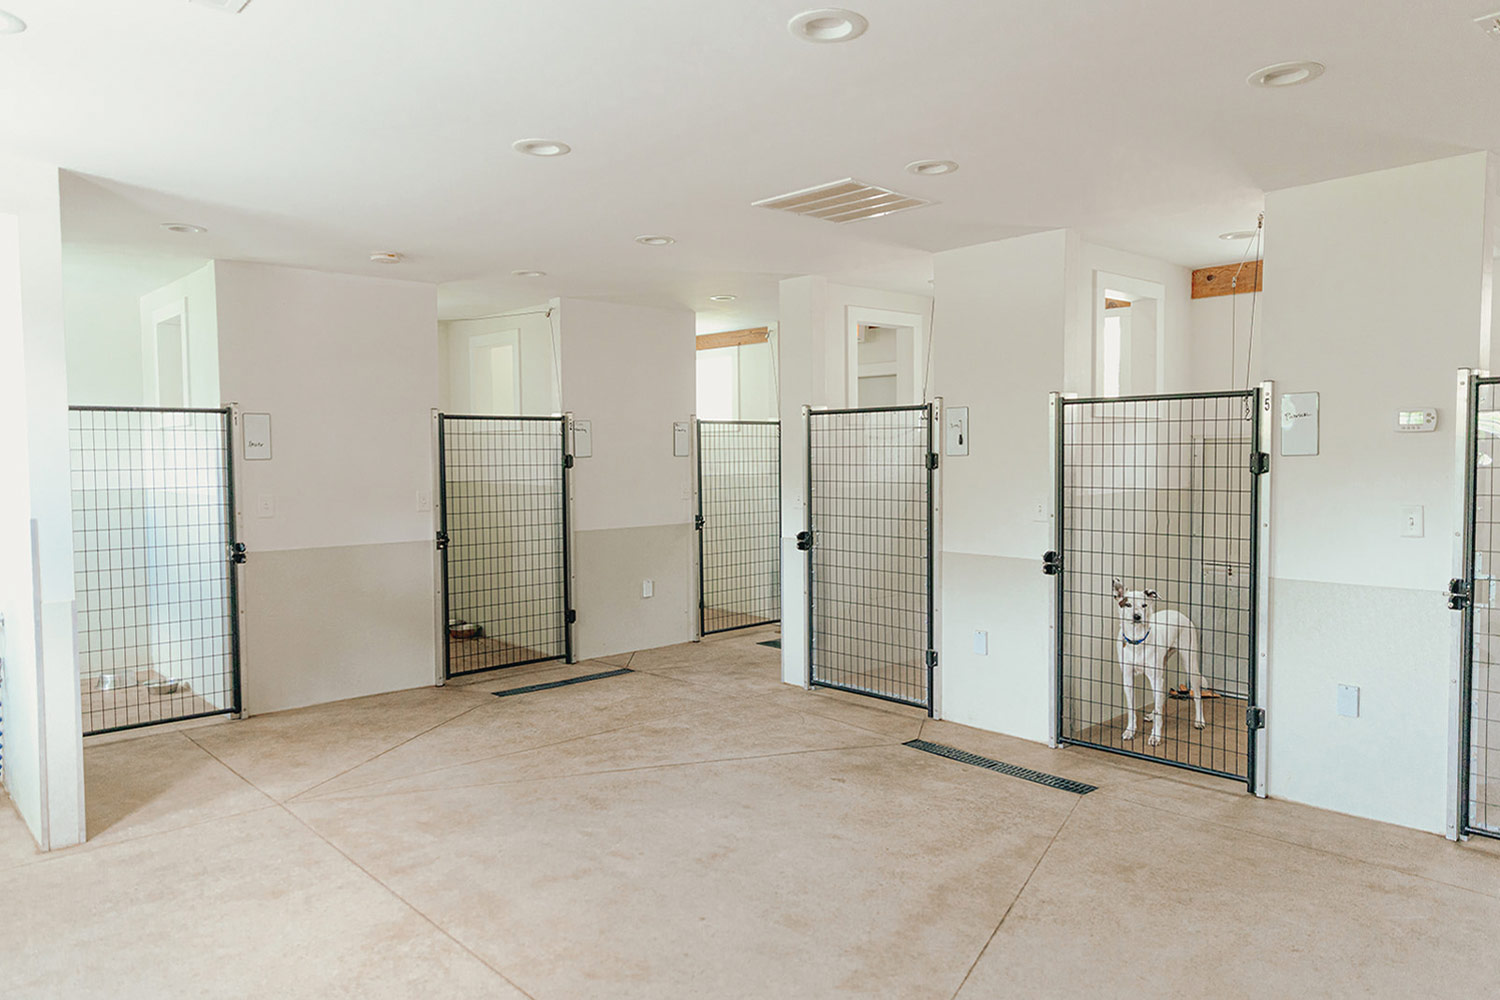 wide view of the Nature of the Dog kennel with a very minimalist interior design and layout, a single dog looks out from behind one of the kennel gates